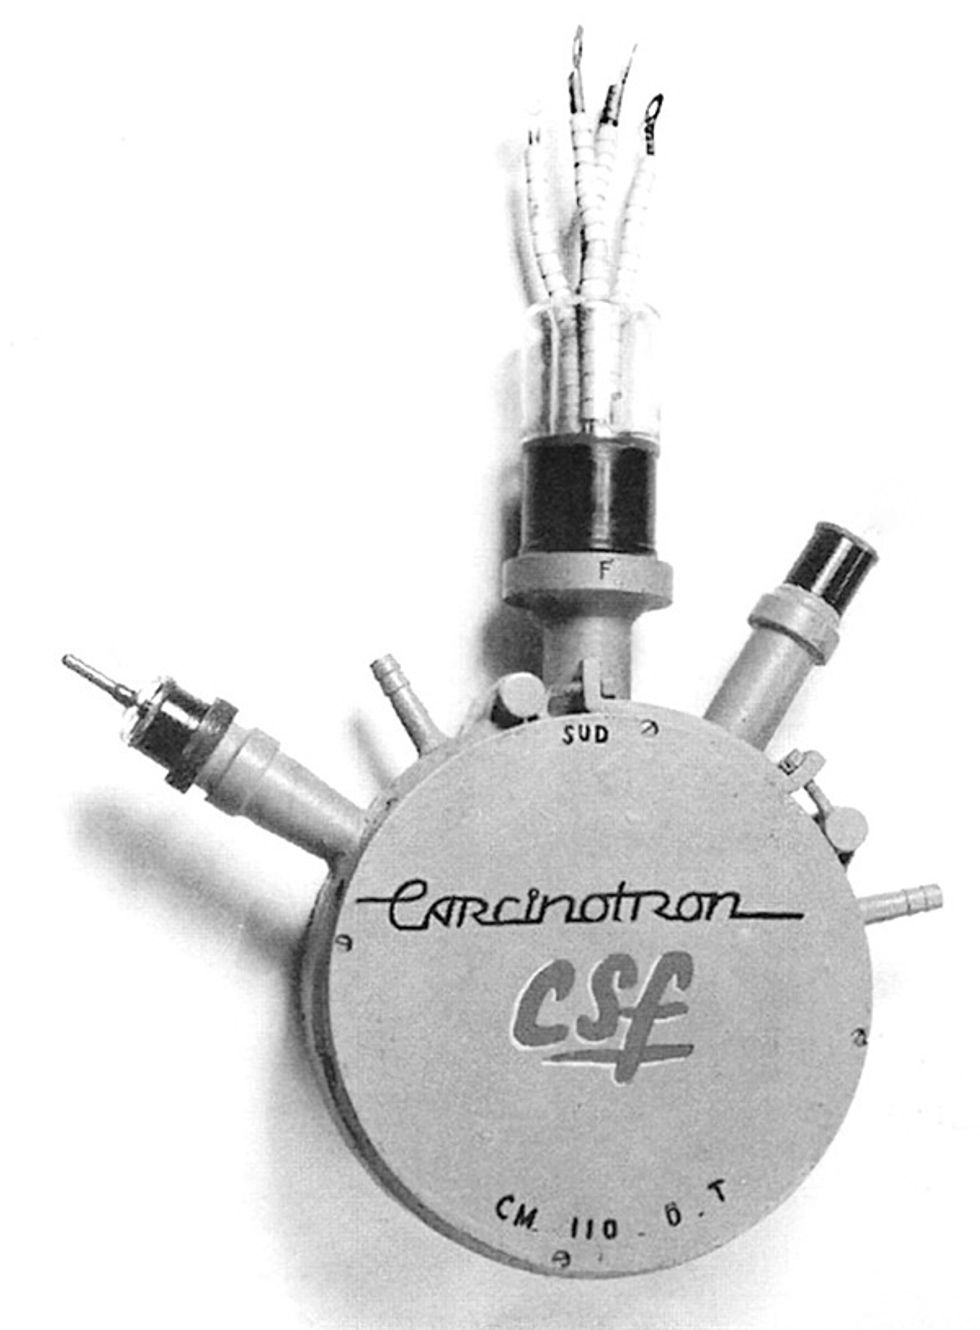 Photo of the Carcinotron